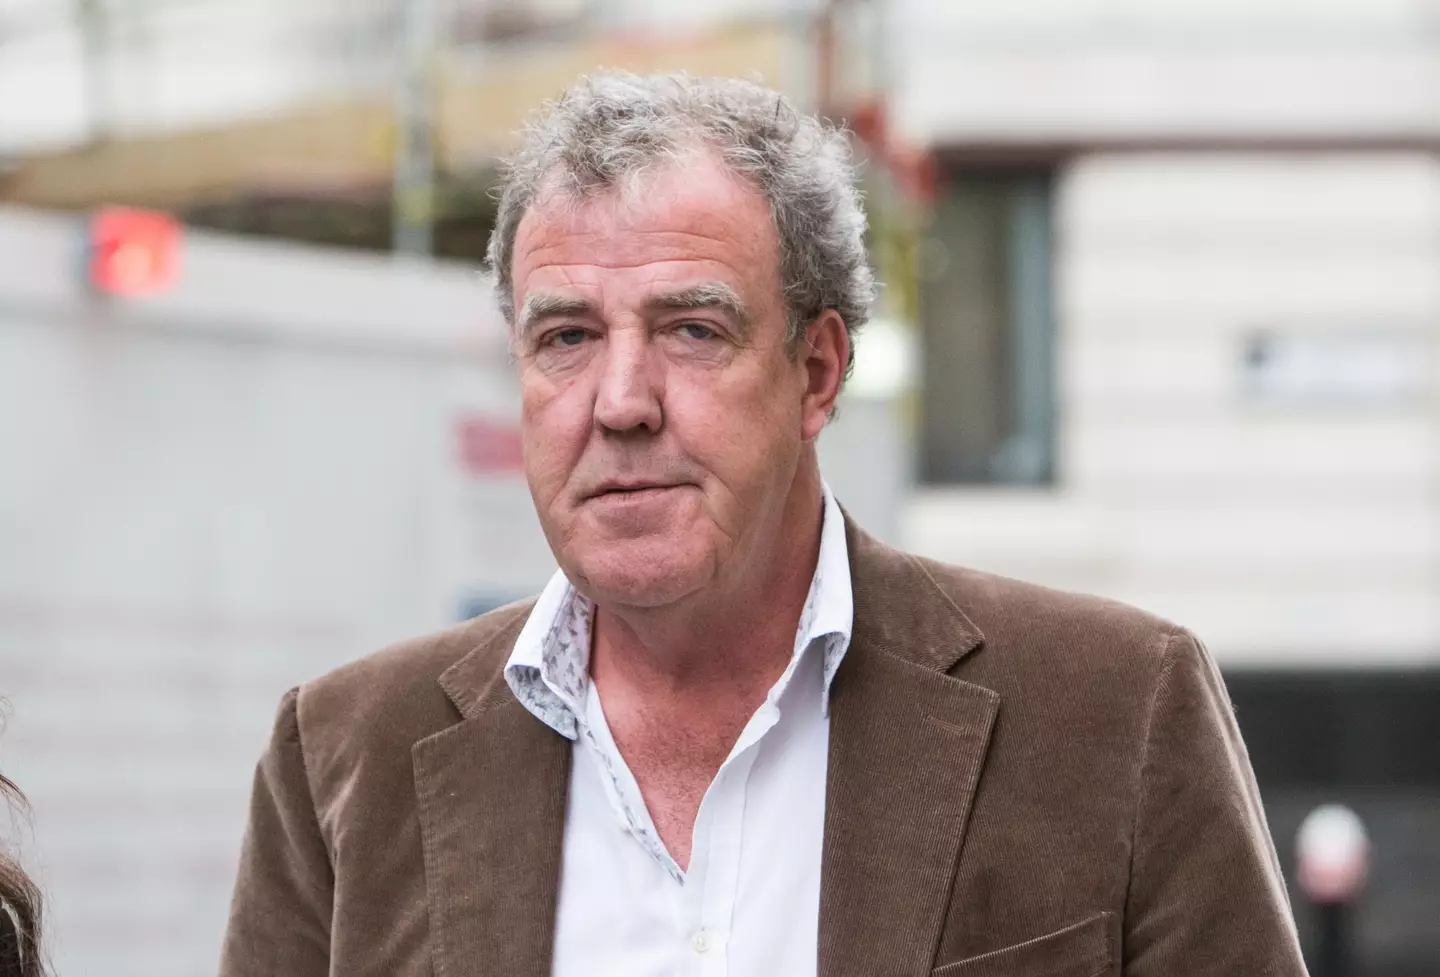 Jeremy Clarkson has faced criticism over comments he made about Prince Harry and Meghan Markle in The Sun.